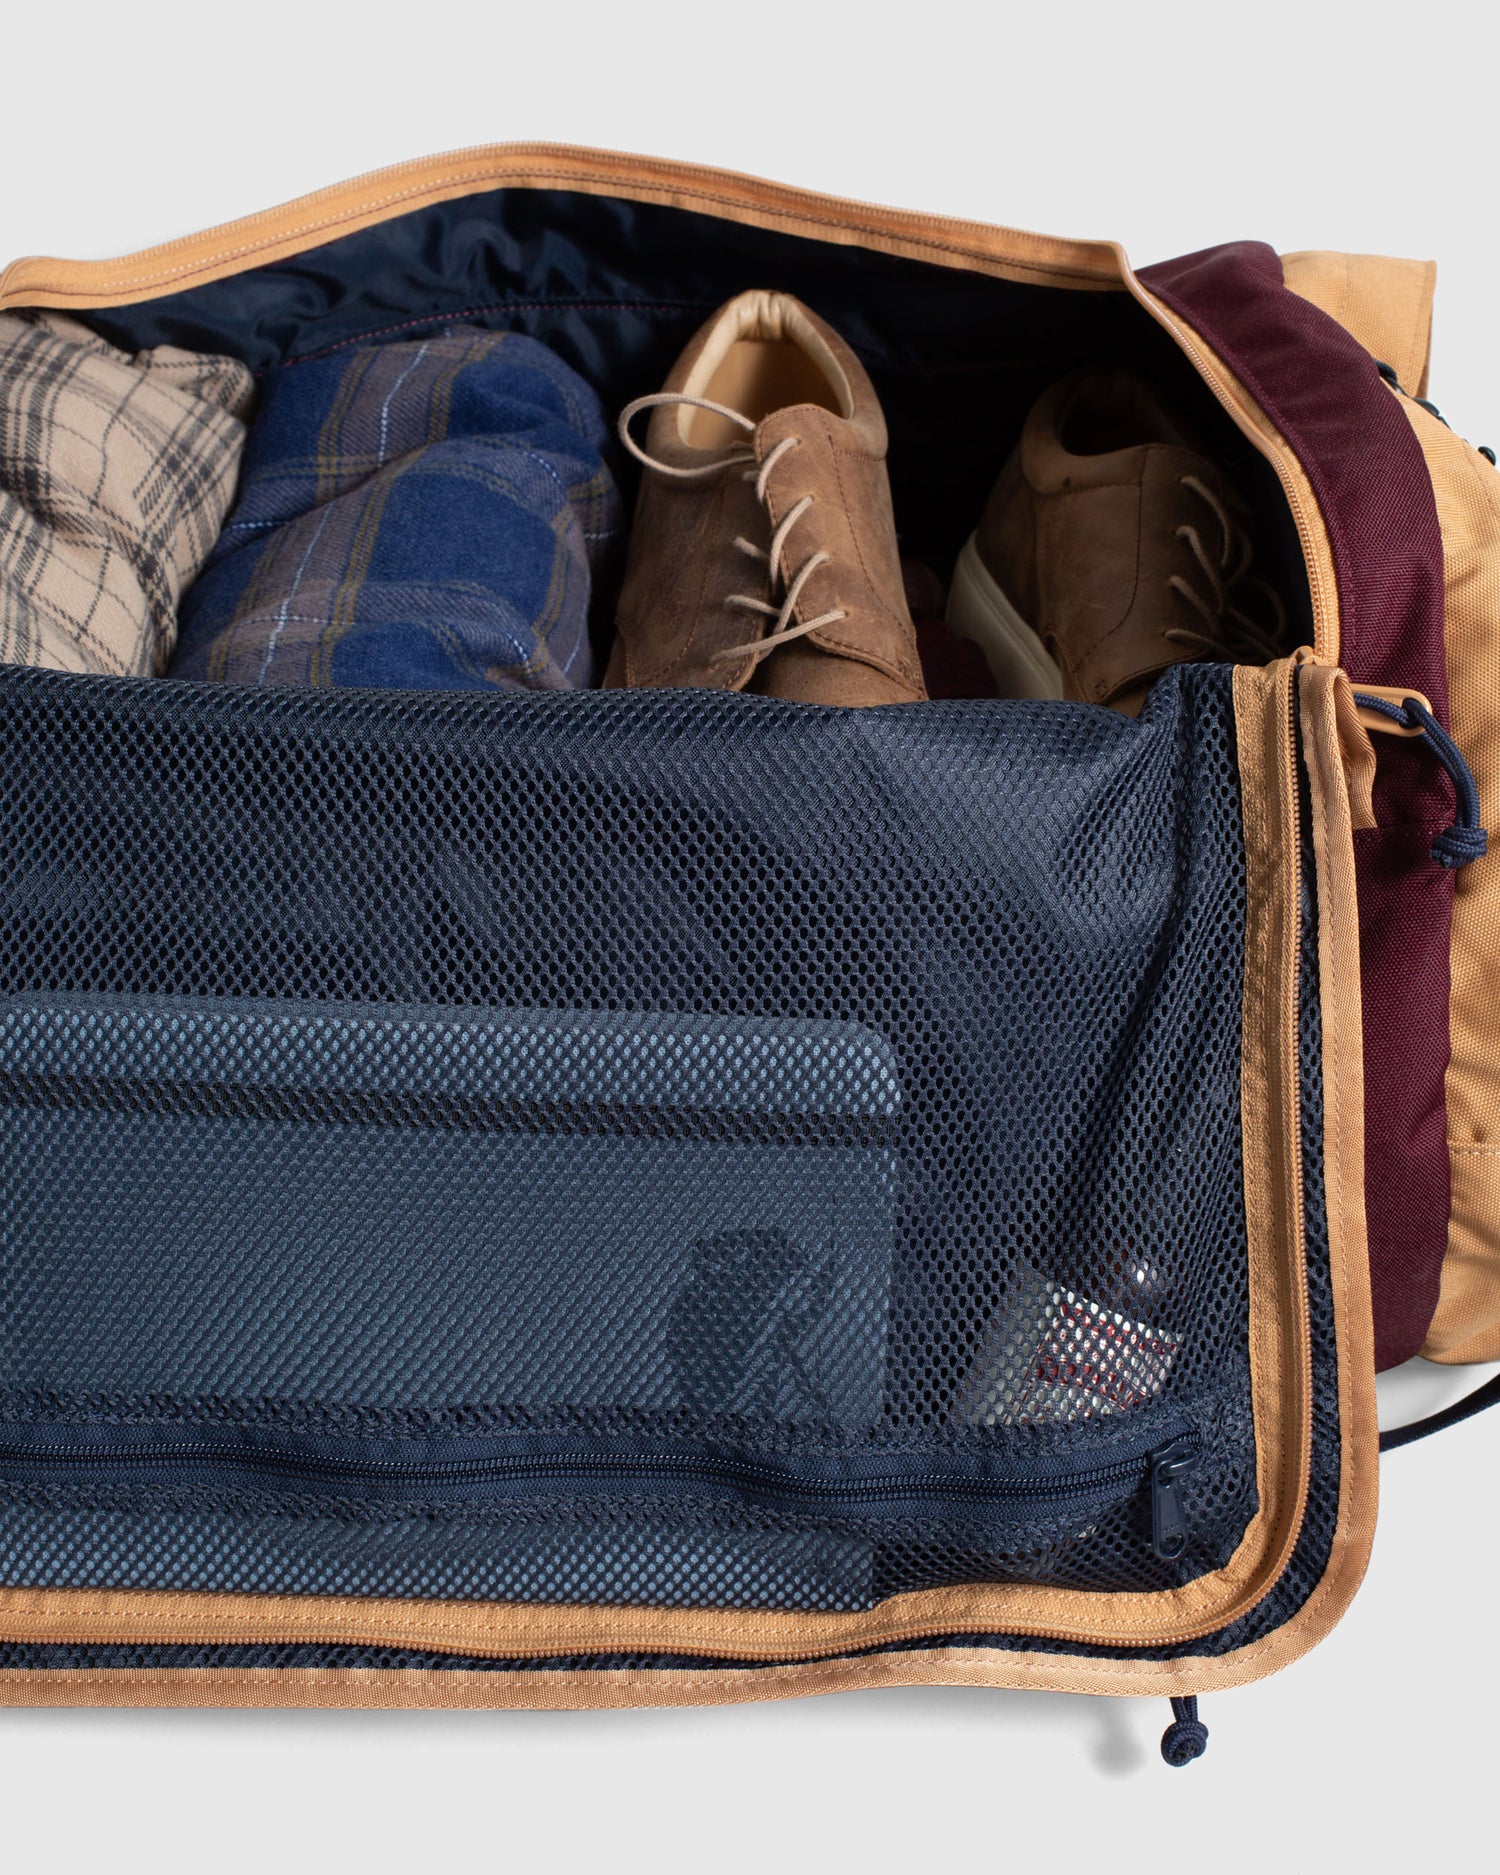 Inside from another angle of duffle bag by United by Blue